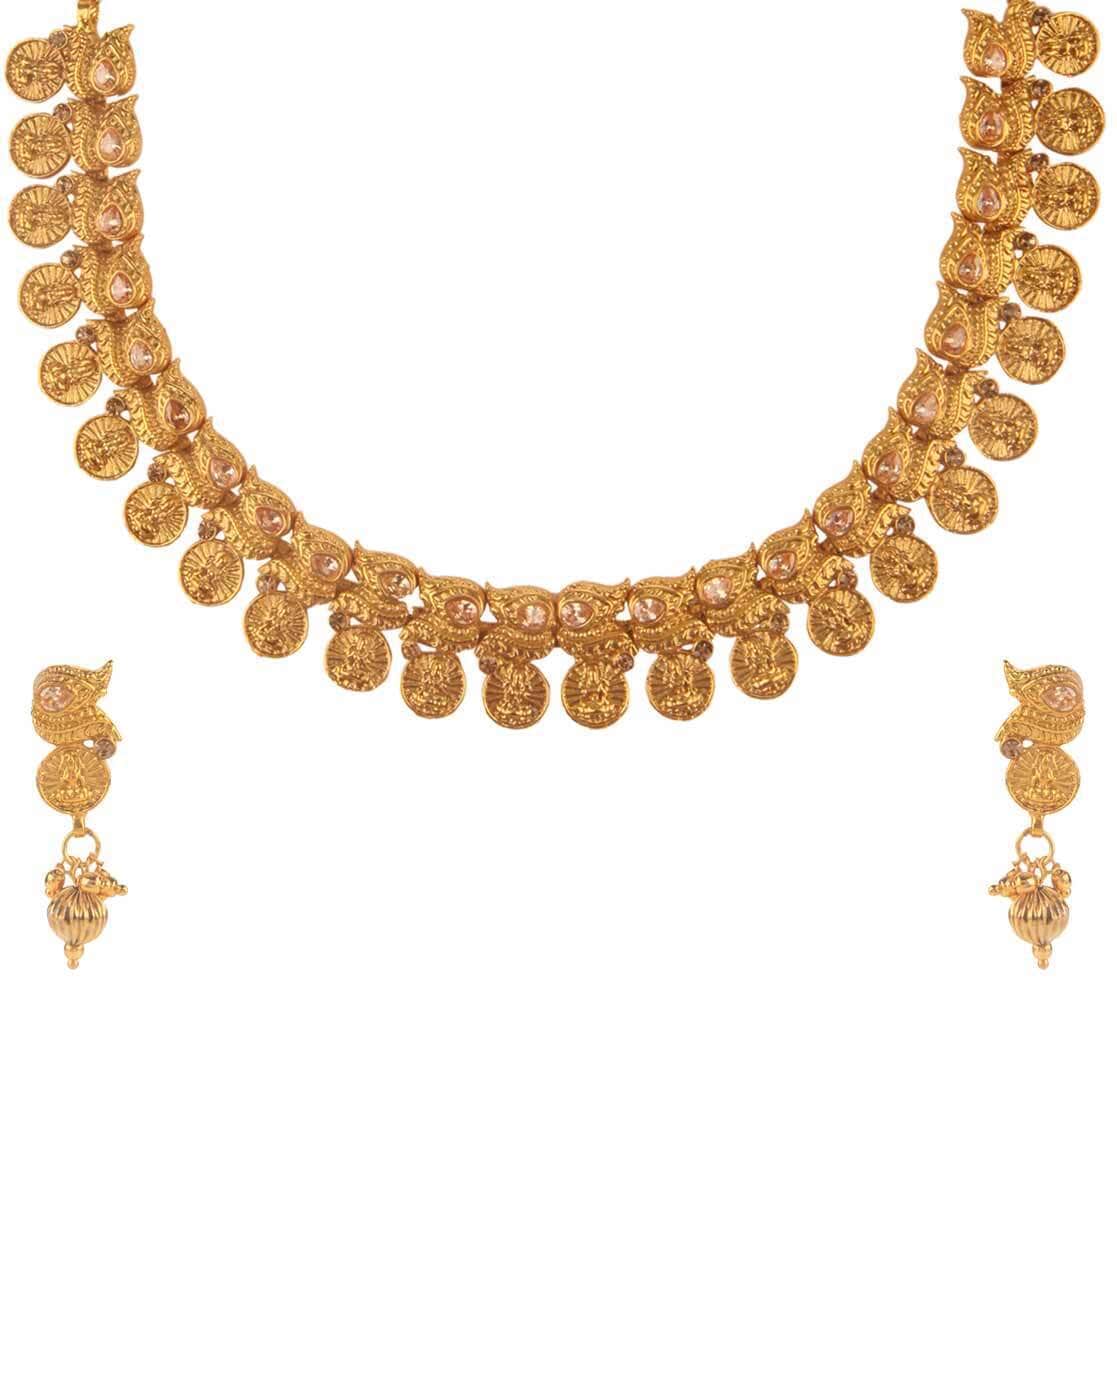 Buy Gold FashionJewellerySets for Women by Kord Store Online